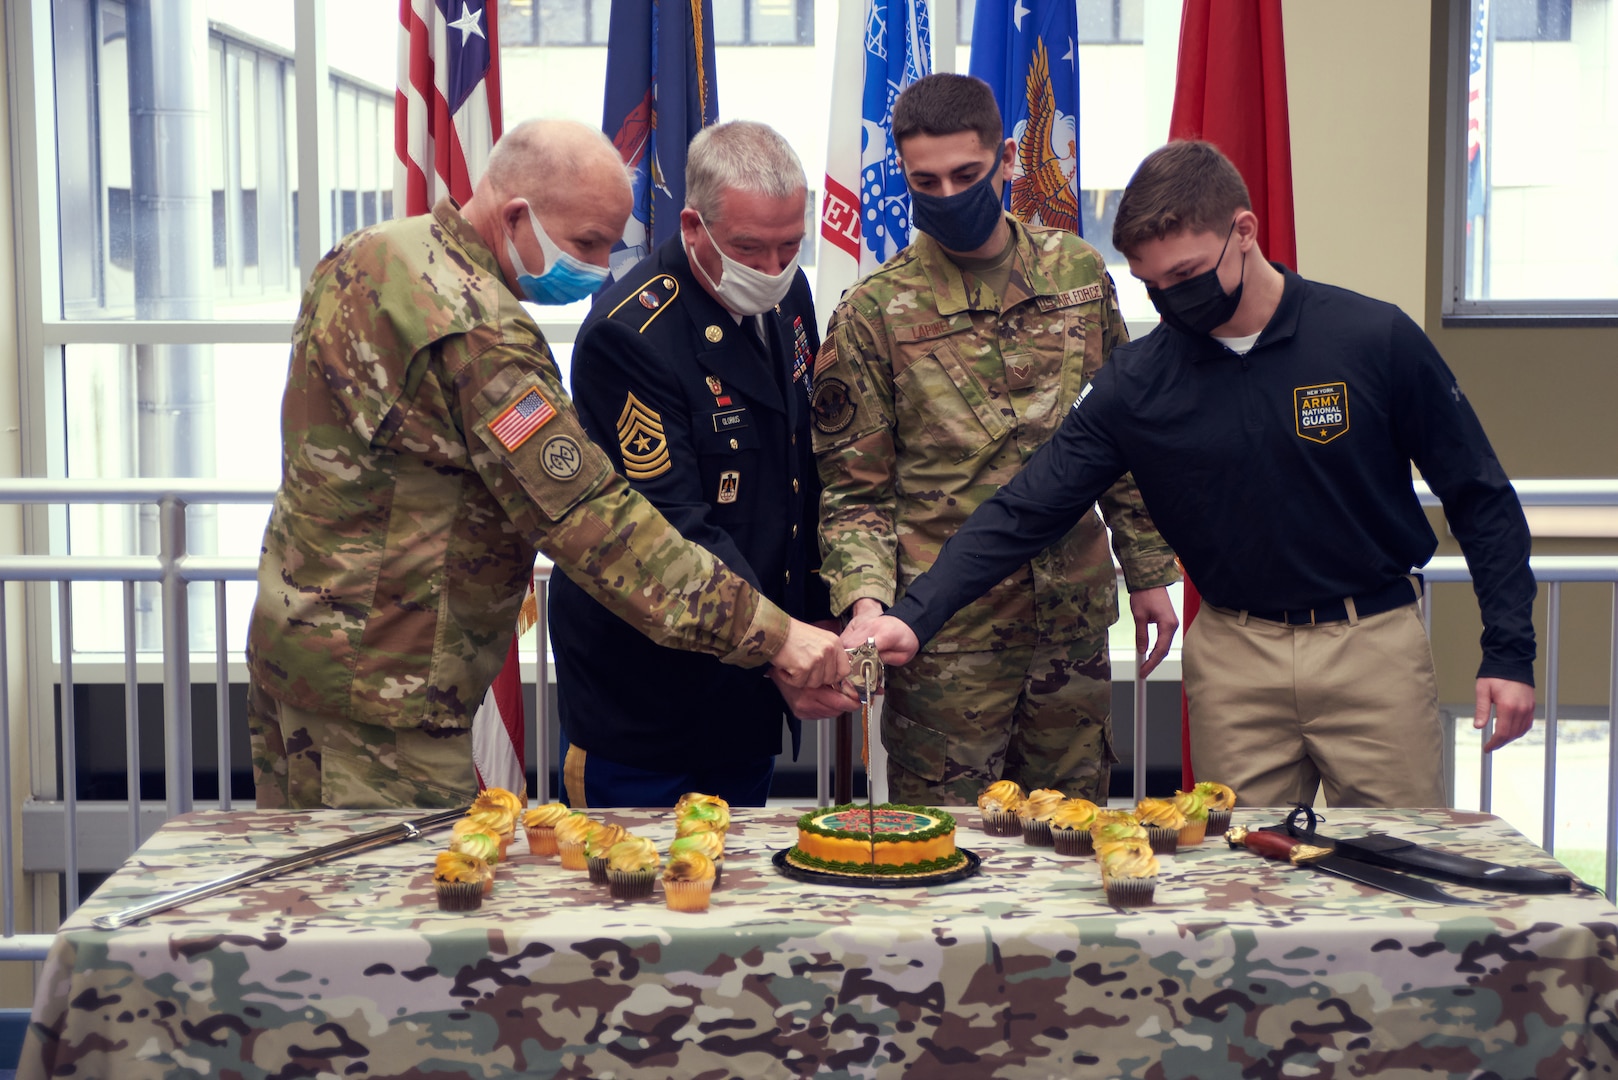 Army Maj. Gen. Raymond Shields, the adjutant general of New York; retired Army Sgt. Maj. Christian Glorius; Air Force Senior Airman Caleb Lapinel and Army Pvt. Malachy McGarry cut the National Guard birthday cake during a ceremony celebrating the 384th birthday of the National Guard at New York National Guard Joint Force Headquarters, Latham, N.Y., Dec. 14, 2020.